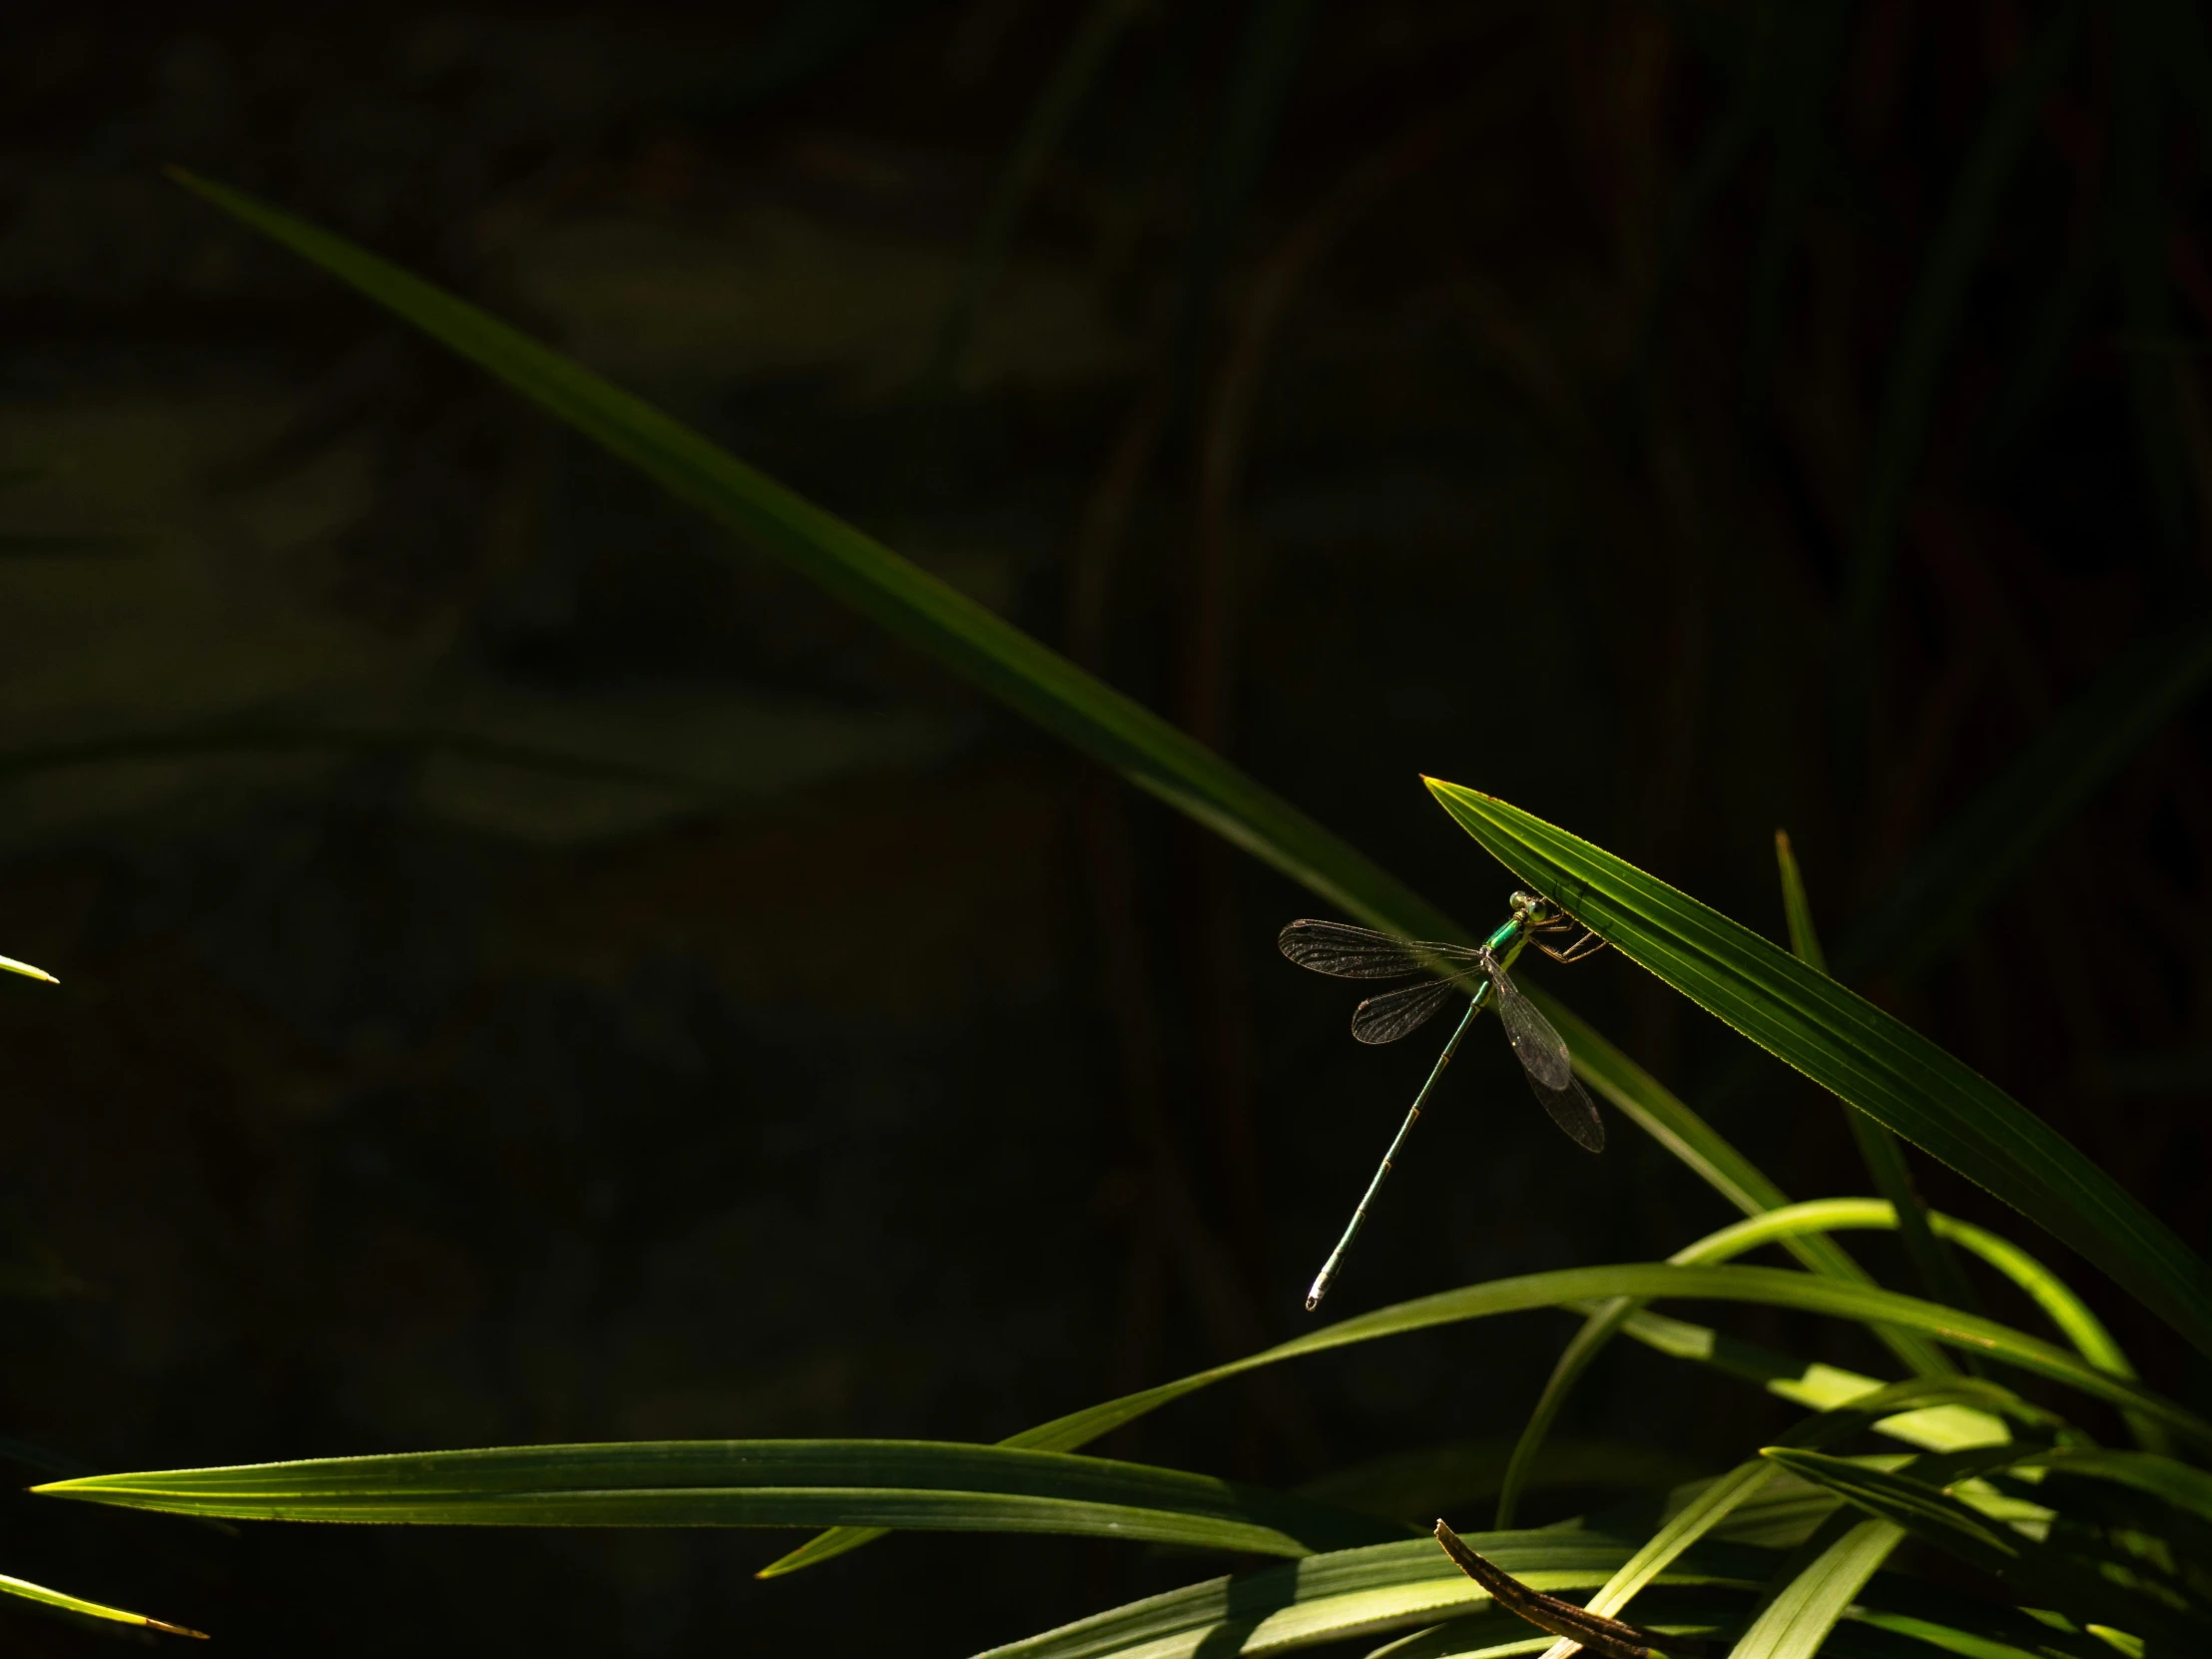 a bug that is perched on some green leaves